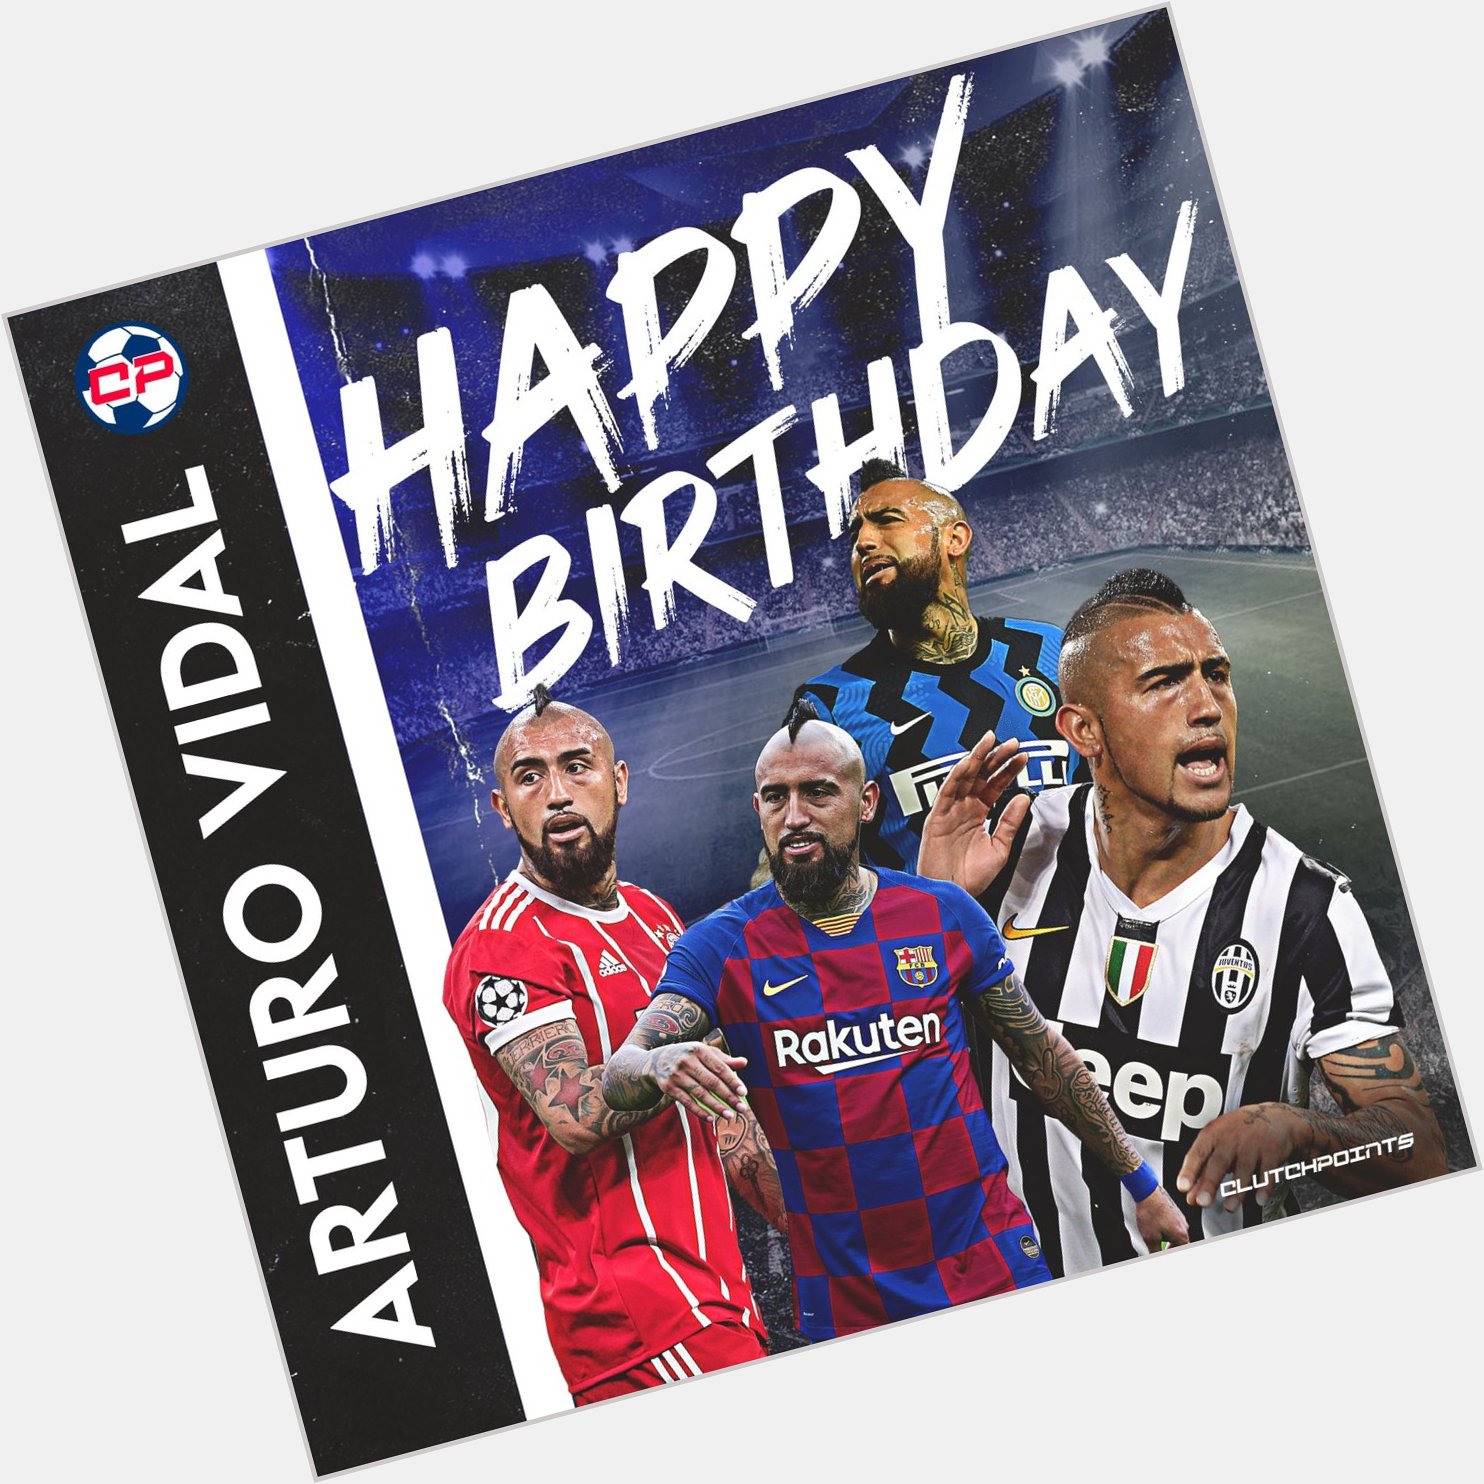 Join us in greeting Arturo Vidal a happy 34th birthday 